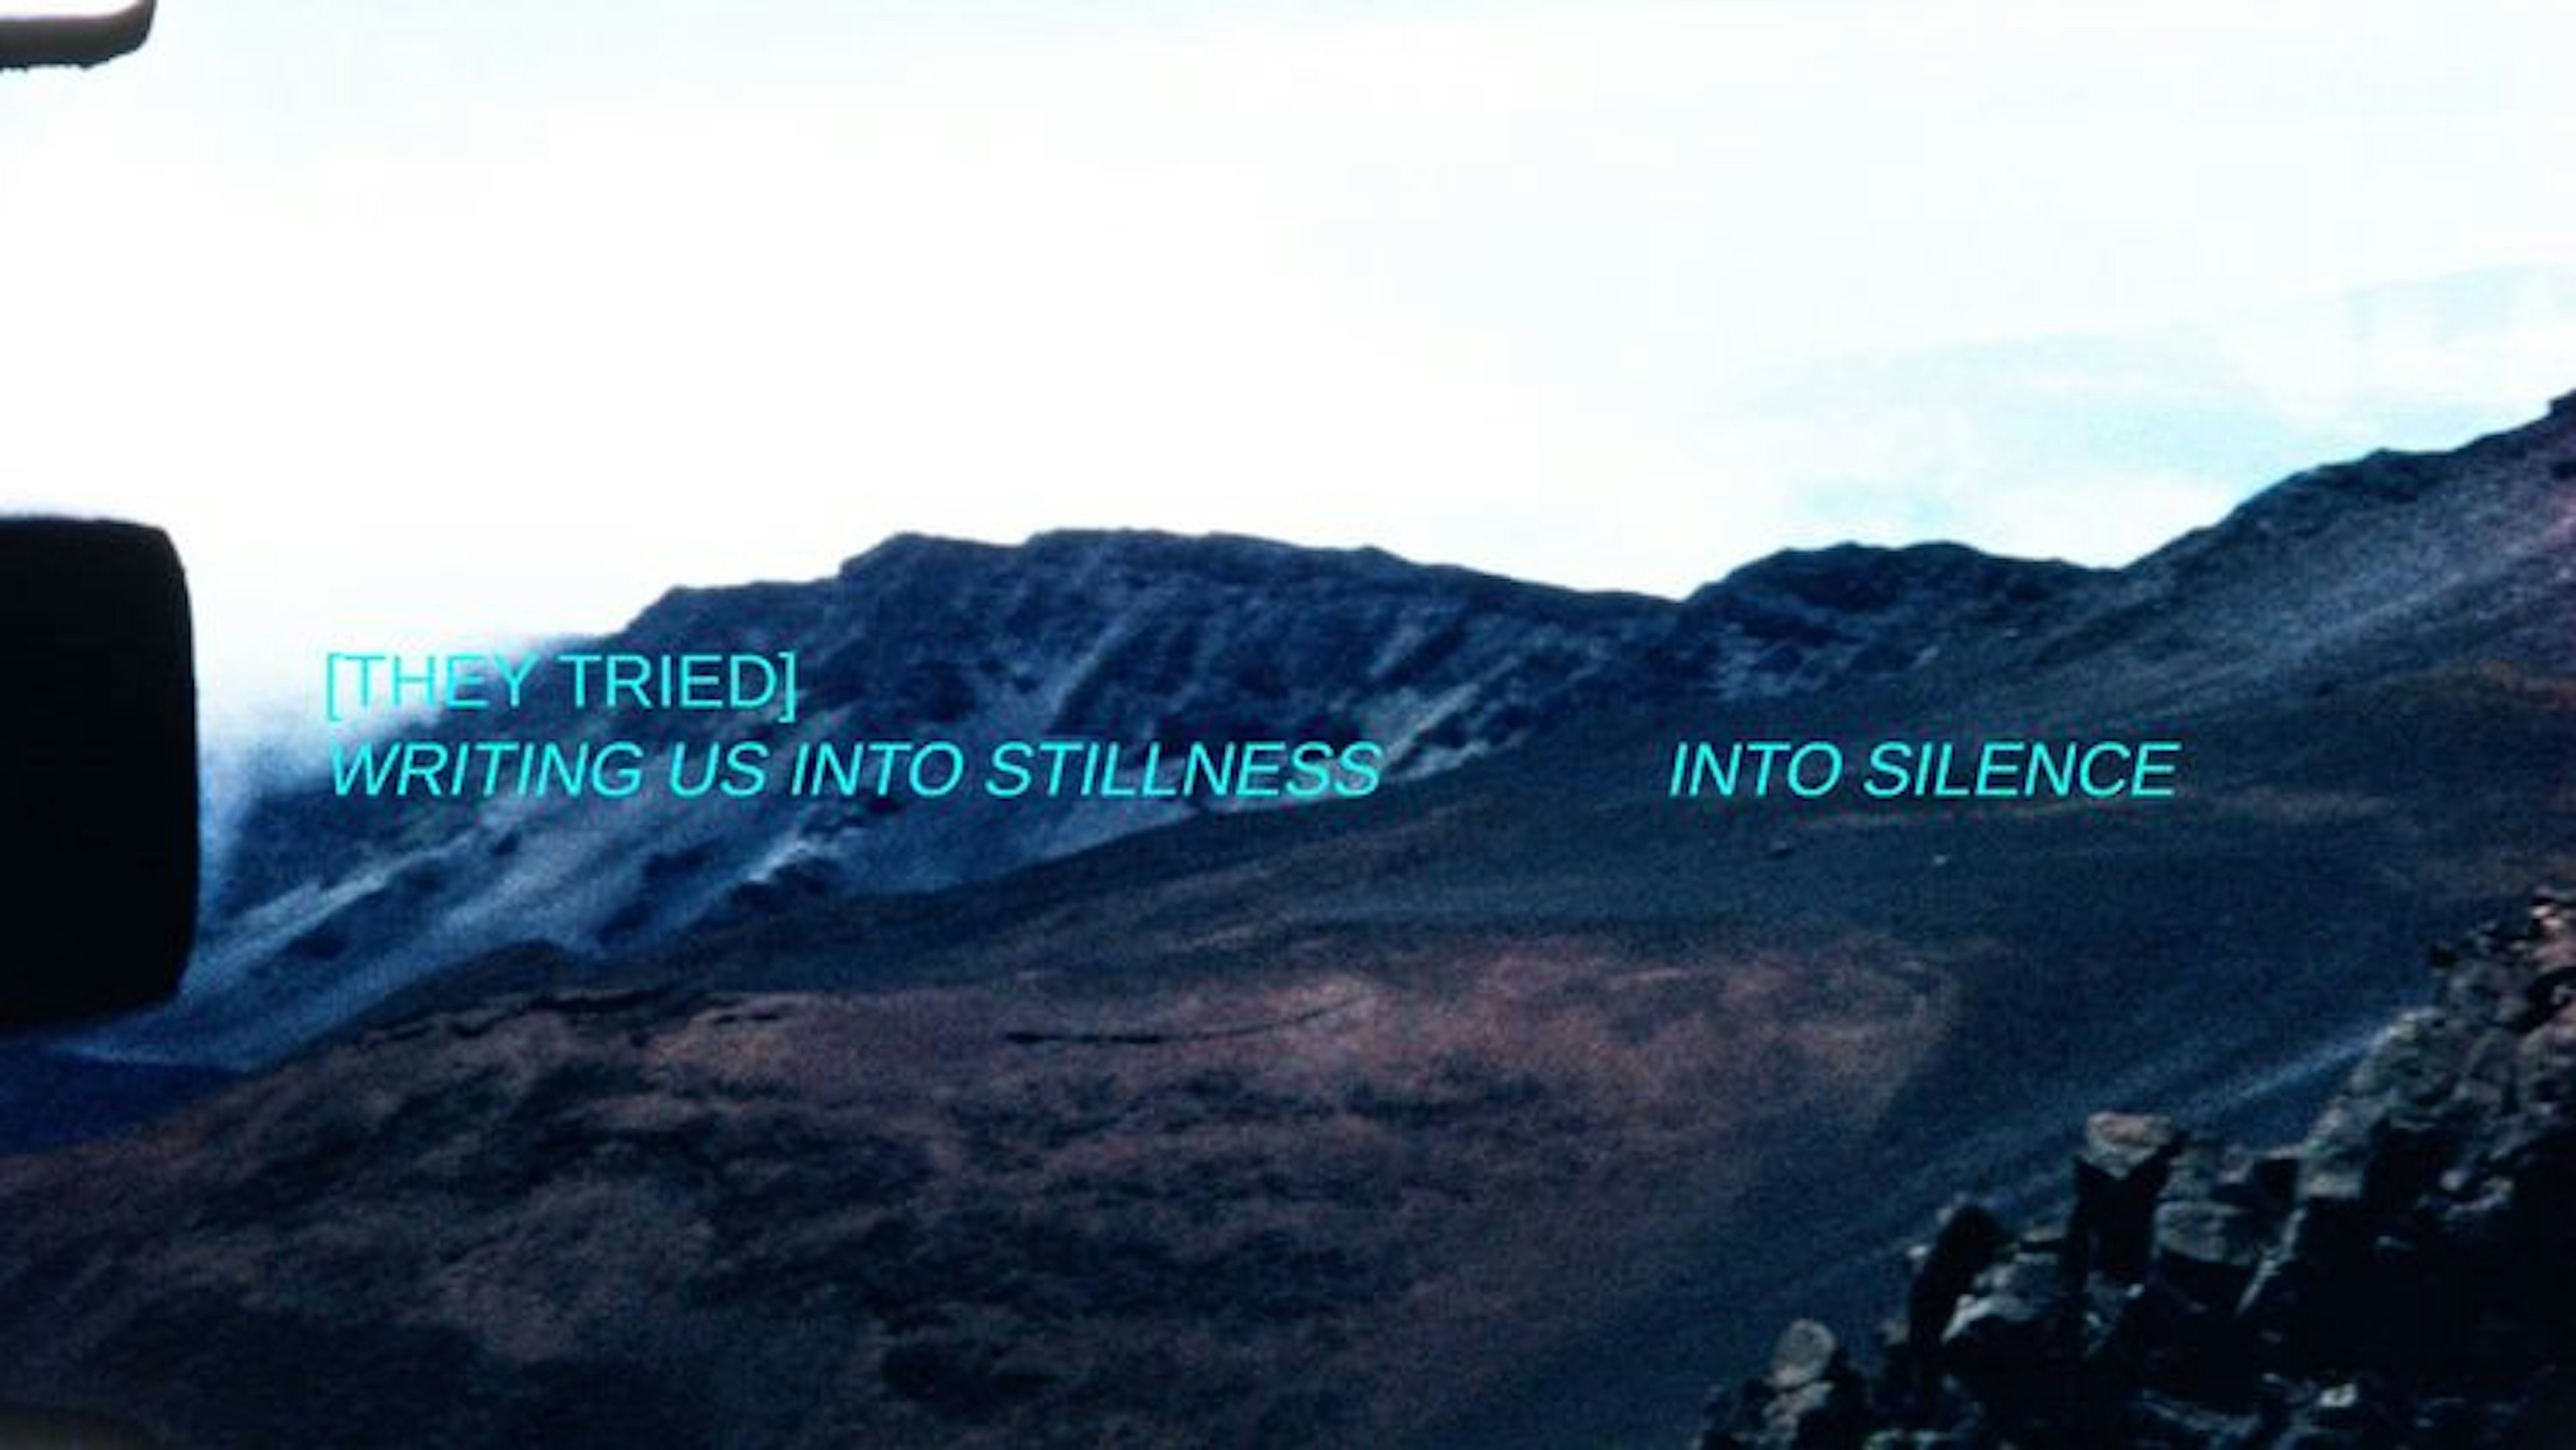 Landscape of mountains with aqua intertitles that read “[they tried] writing us into stillness into silence.” There is a black rectangle on the edge of the frame indicating a perforation from the film scan.